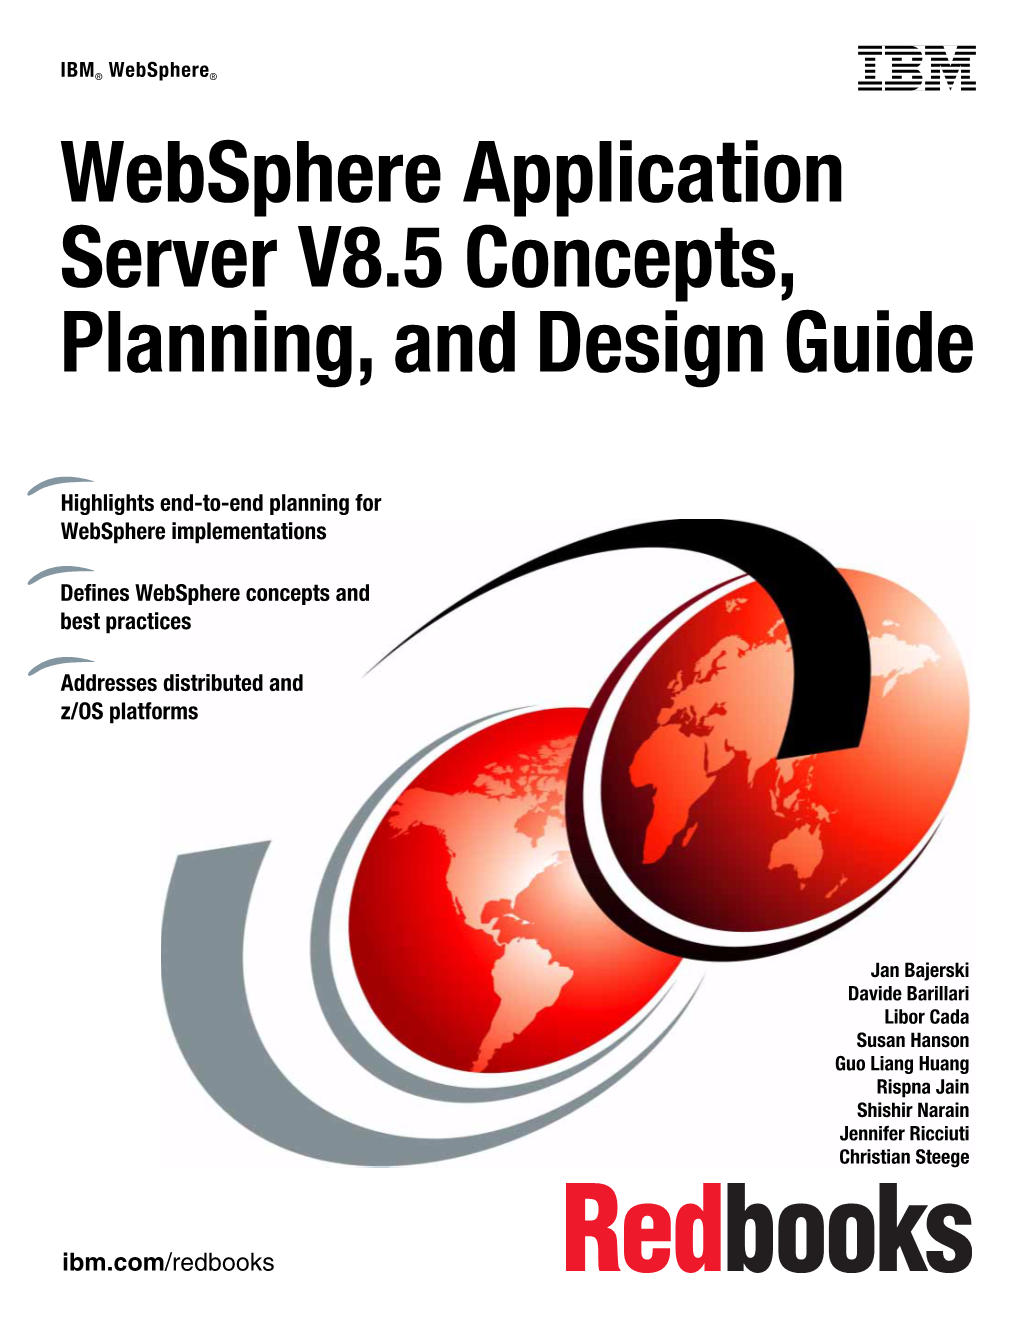 Concepts of Websphere Application Server